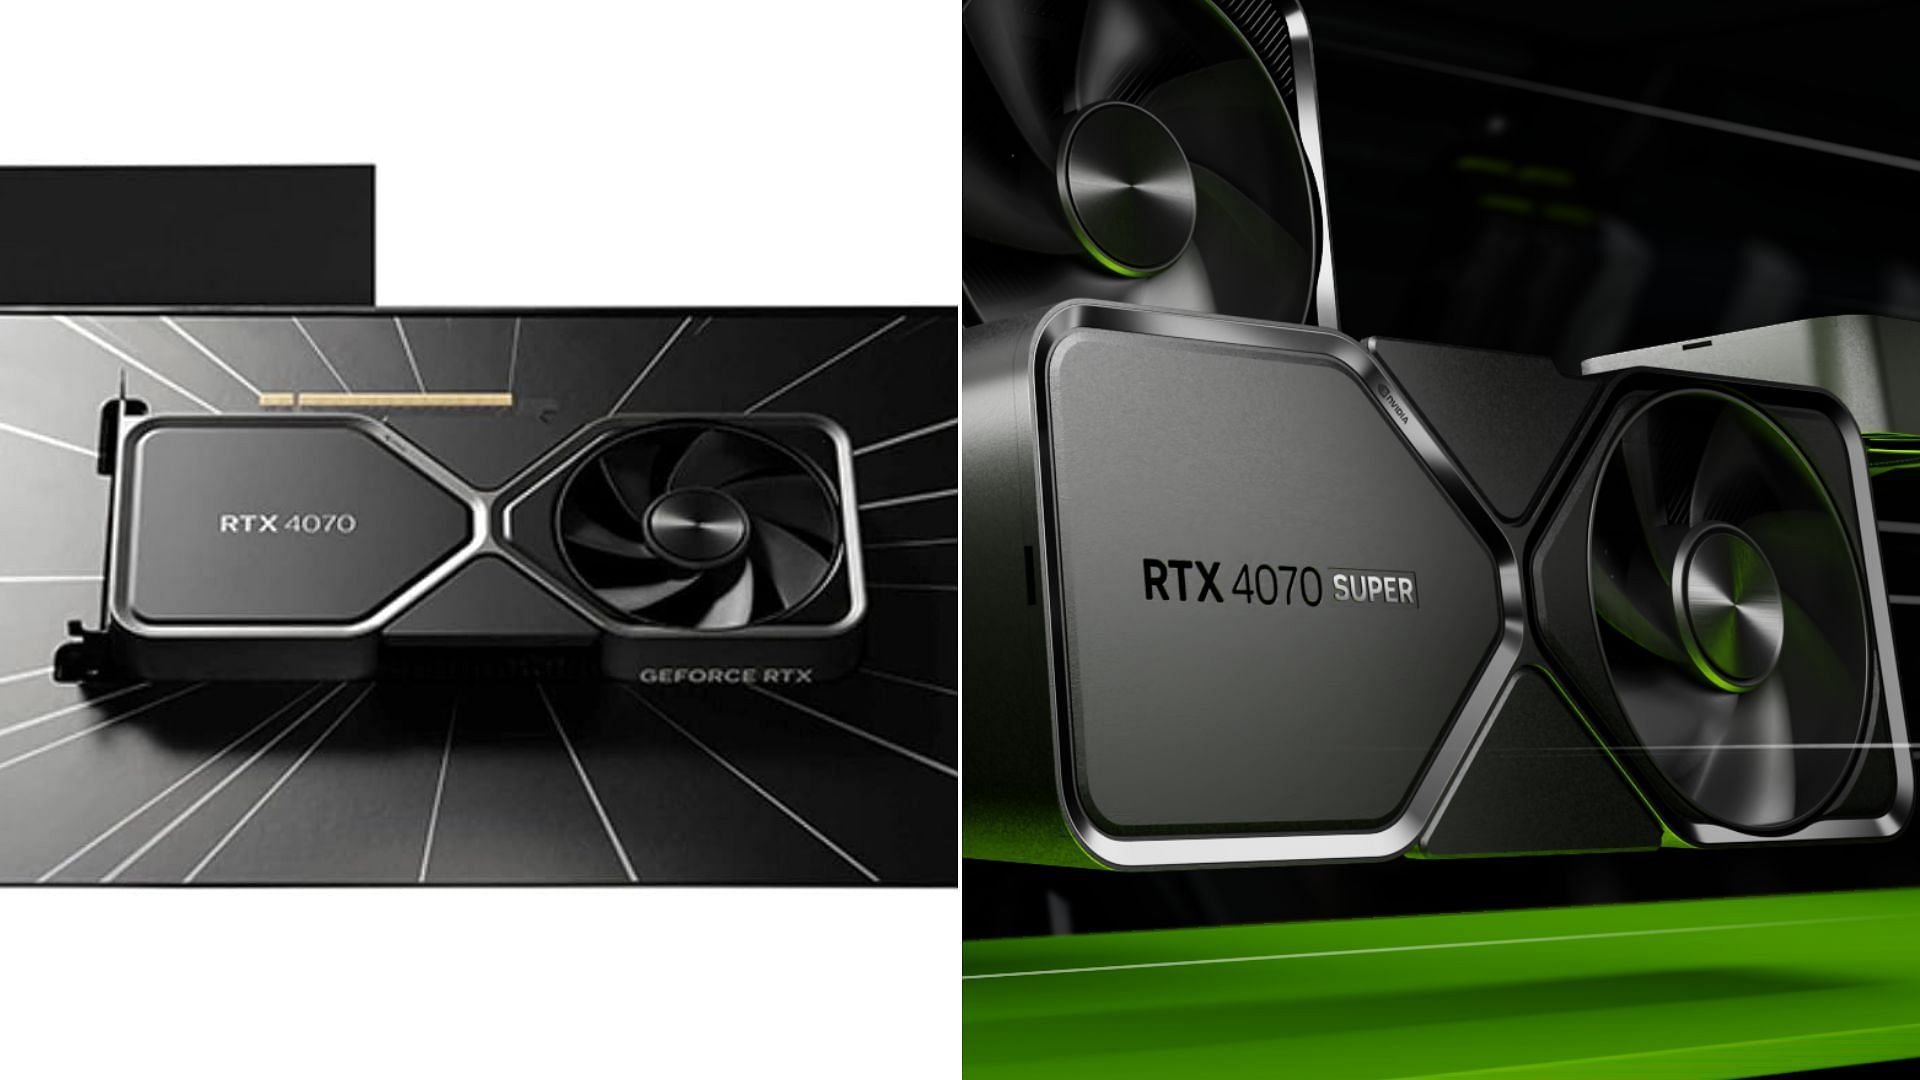 The RTX 4070 and 4070 Super are some of the best 1440p GPUs today (Image via Nvidia and Amazon)